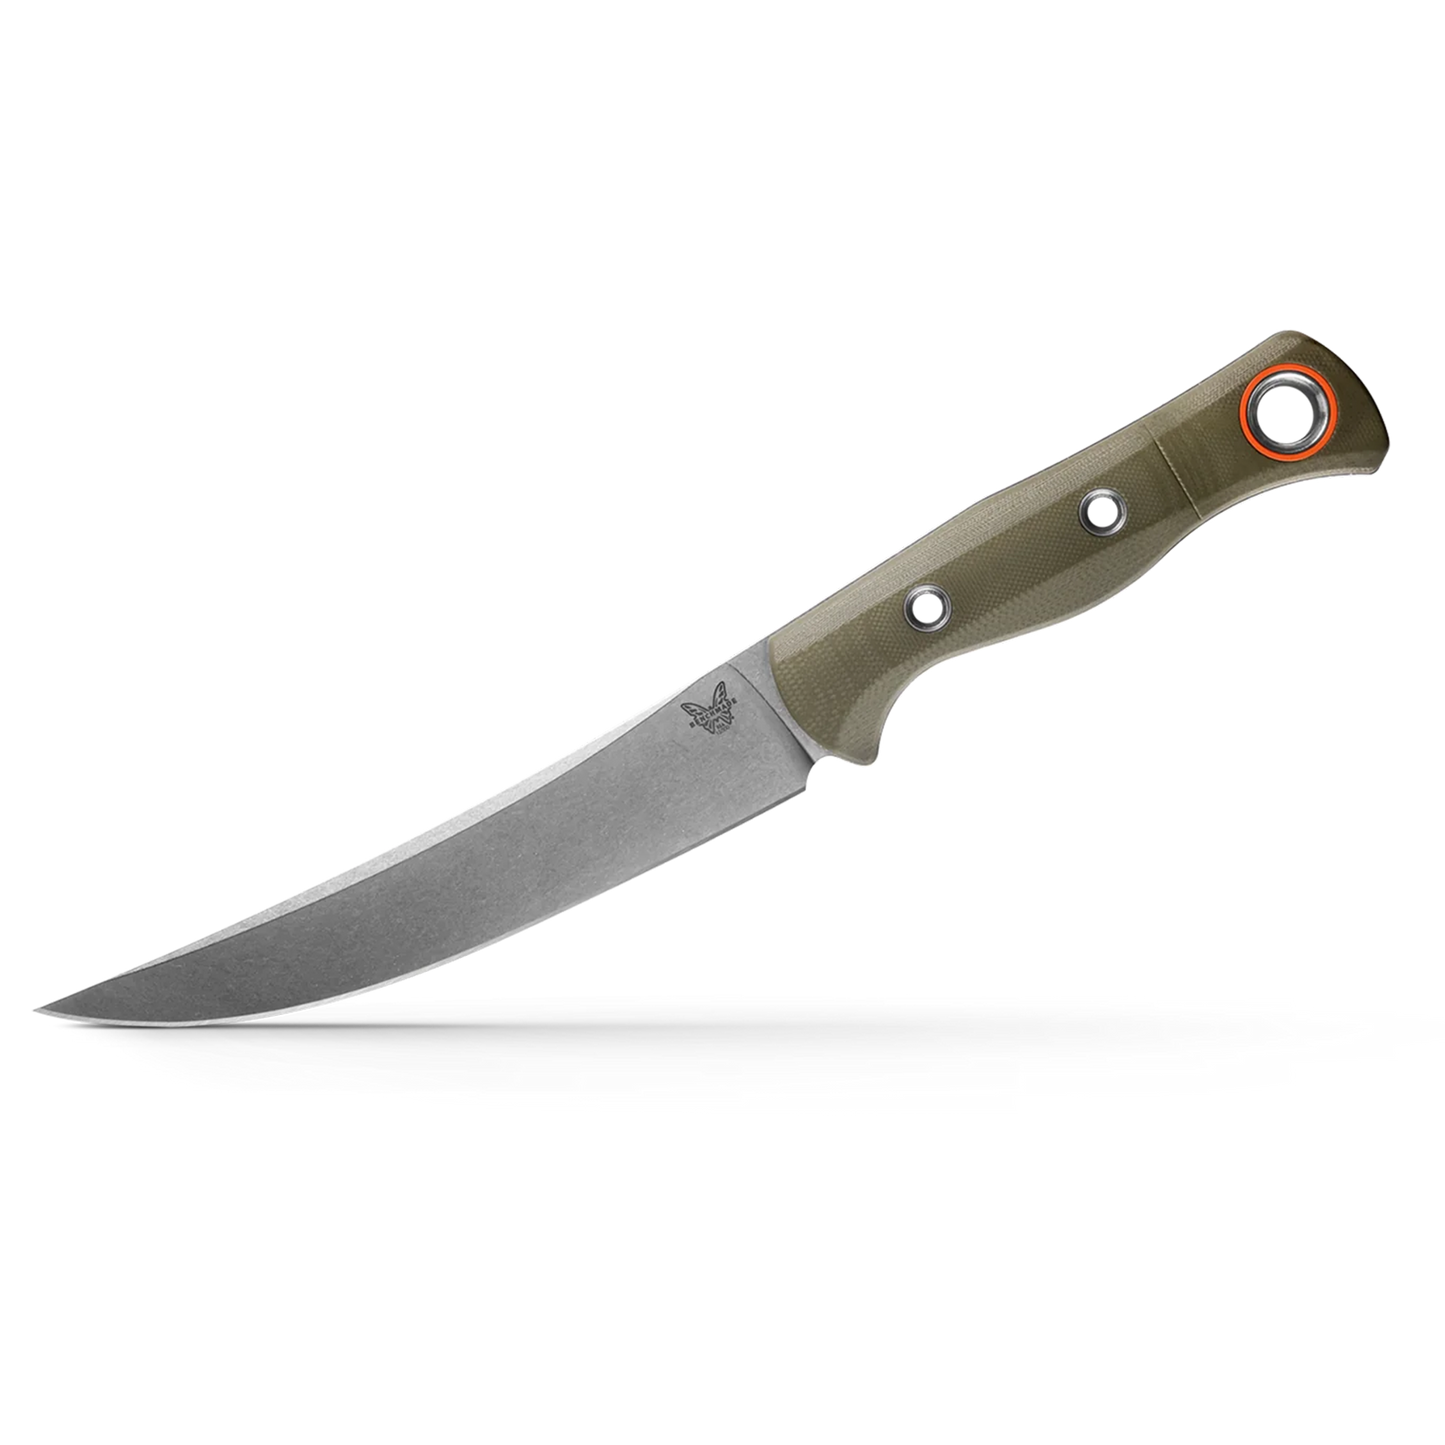 15500-3 Hunt Meatcrafter Fixed Blade Knife 6.08" CPM-S45VN Stonewashed Trailing Point, OD Green G10 Handles, Boltaron Sheath